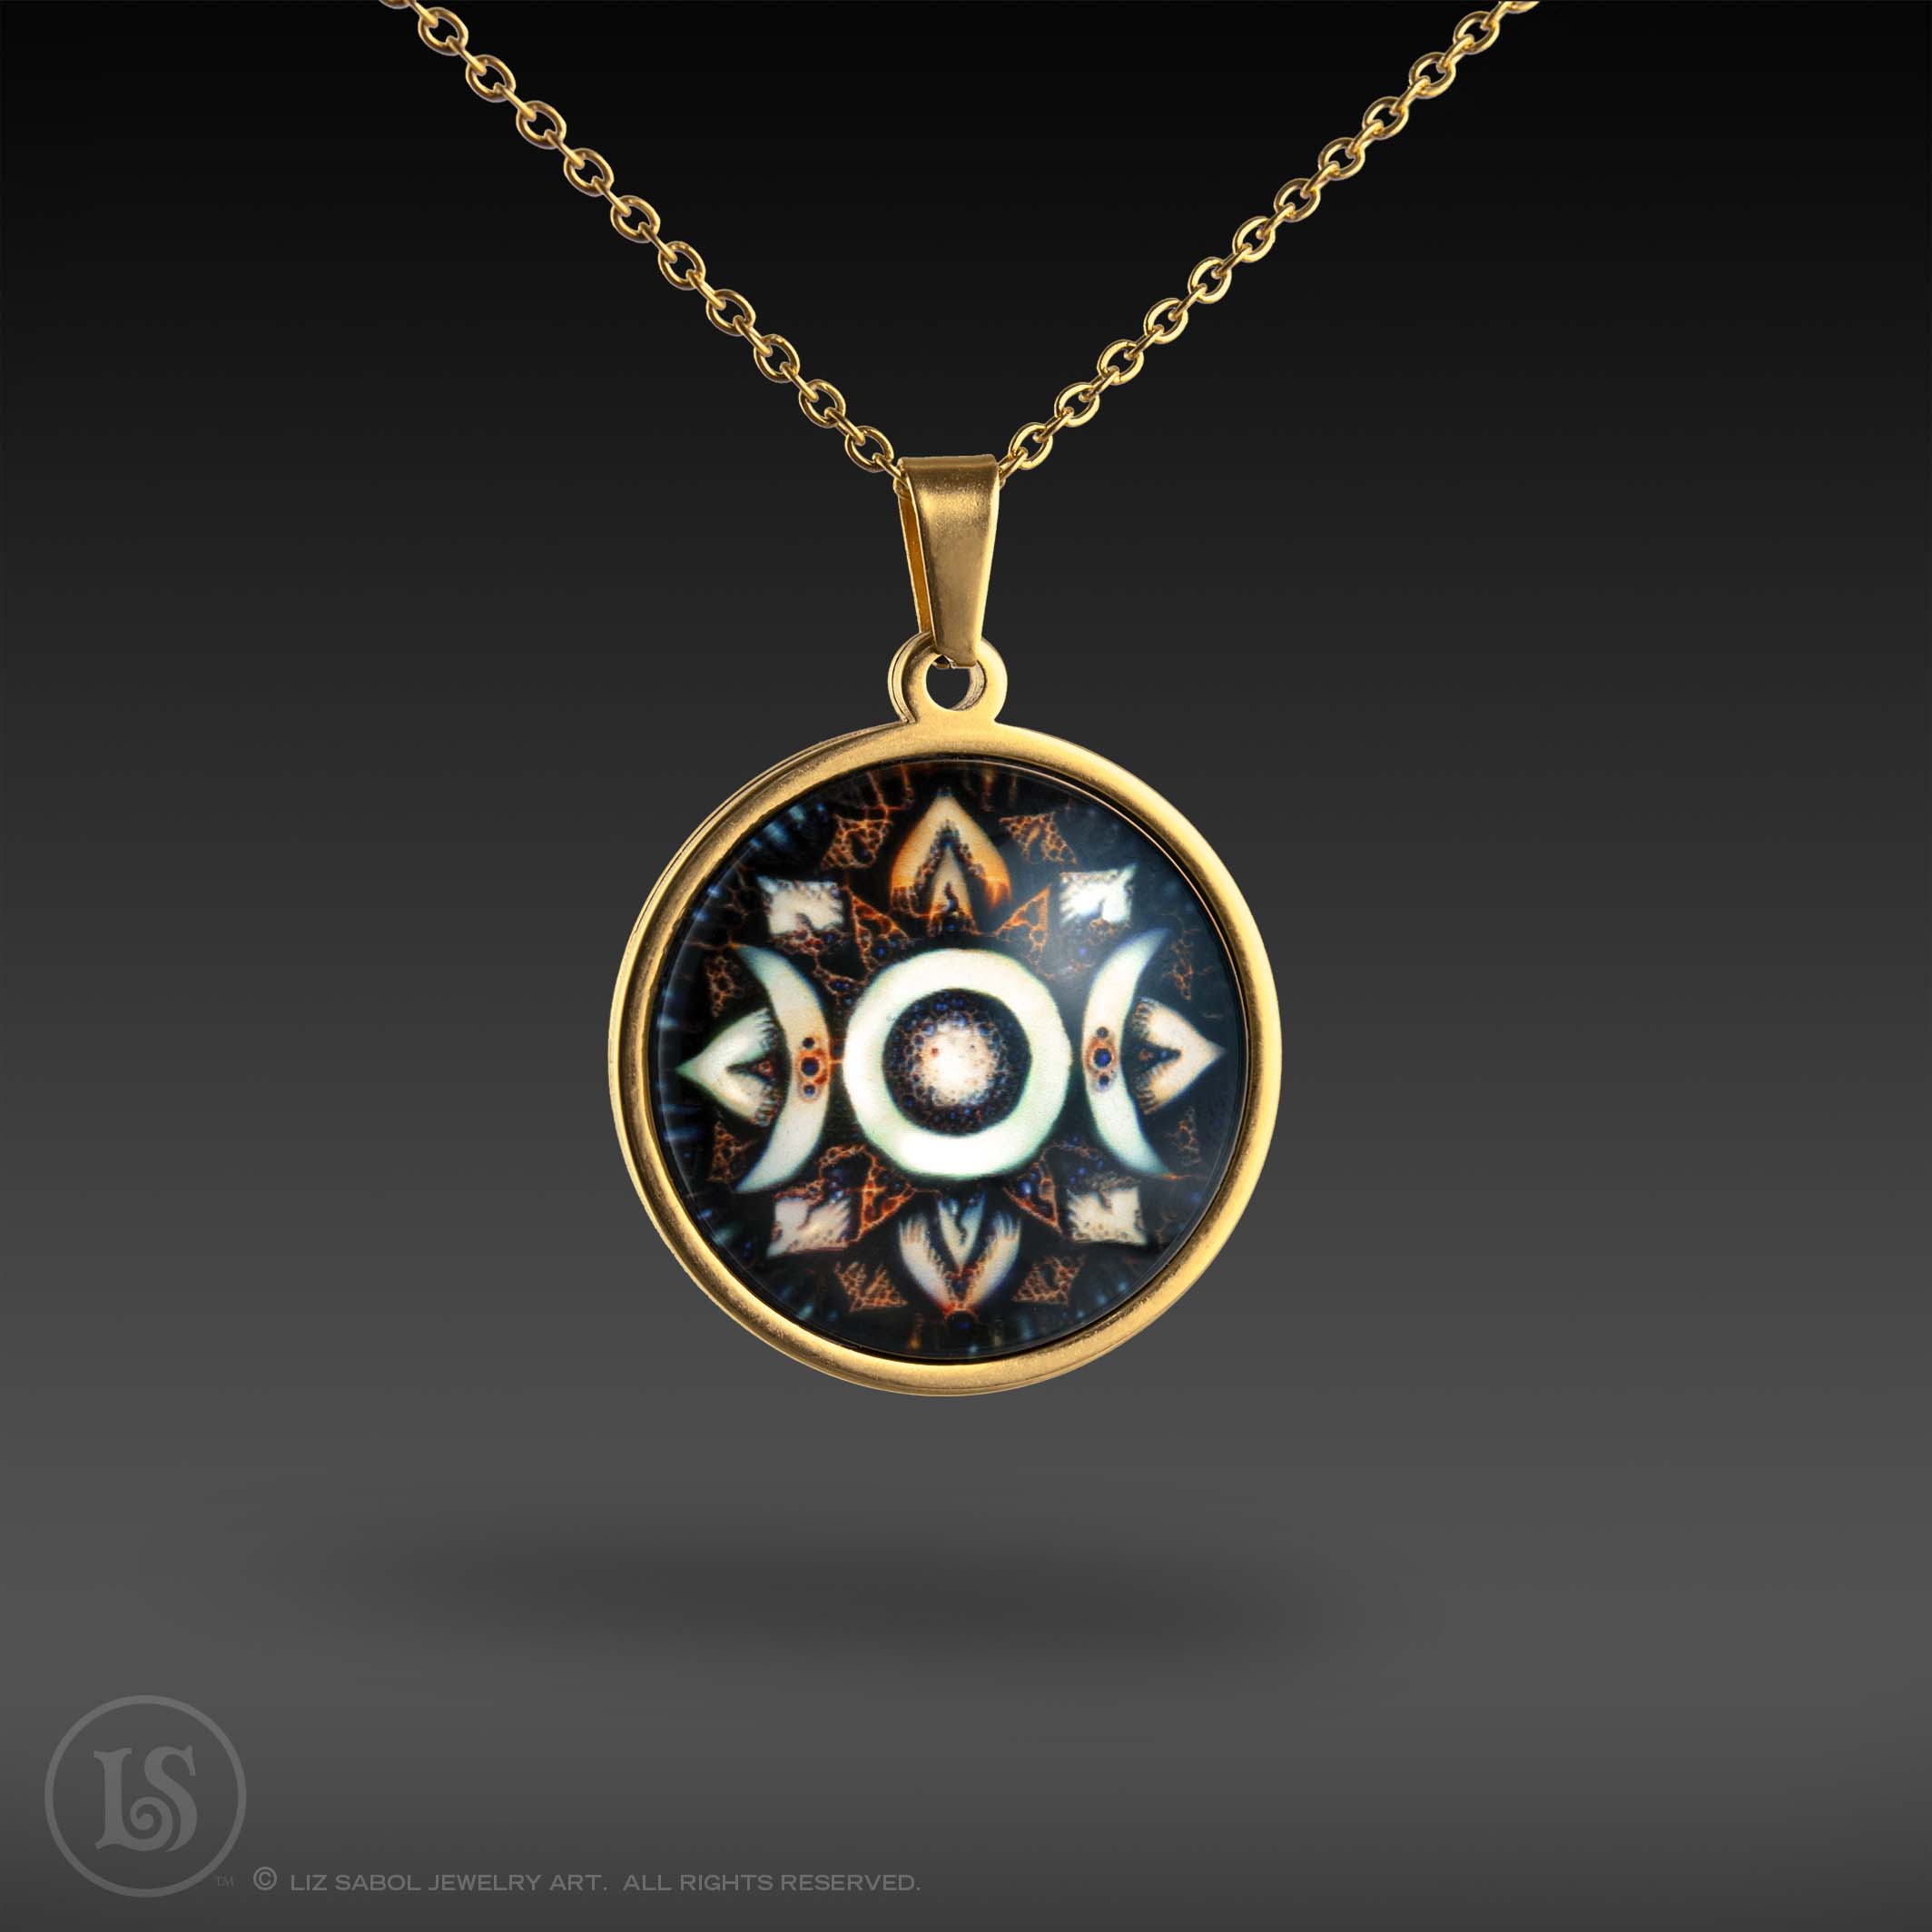 Vintage Dreams Triple Goddess Pendant, Glass, Gold-plated Stainless Steel